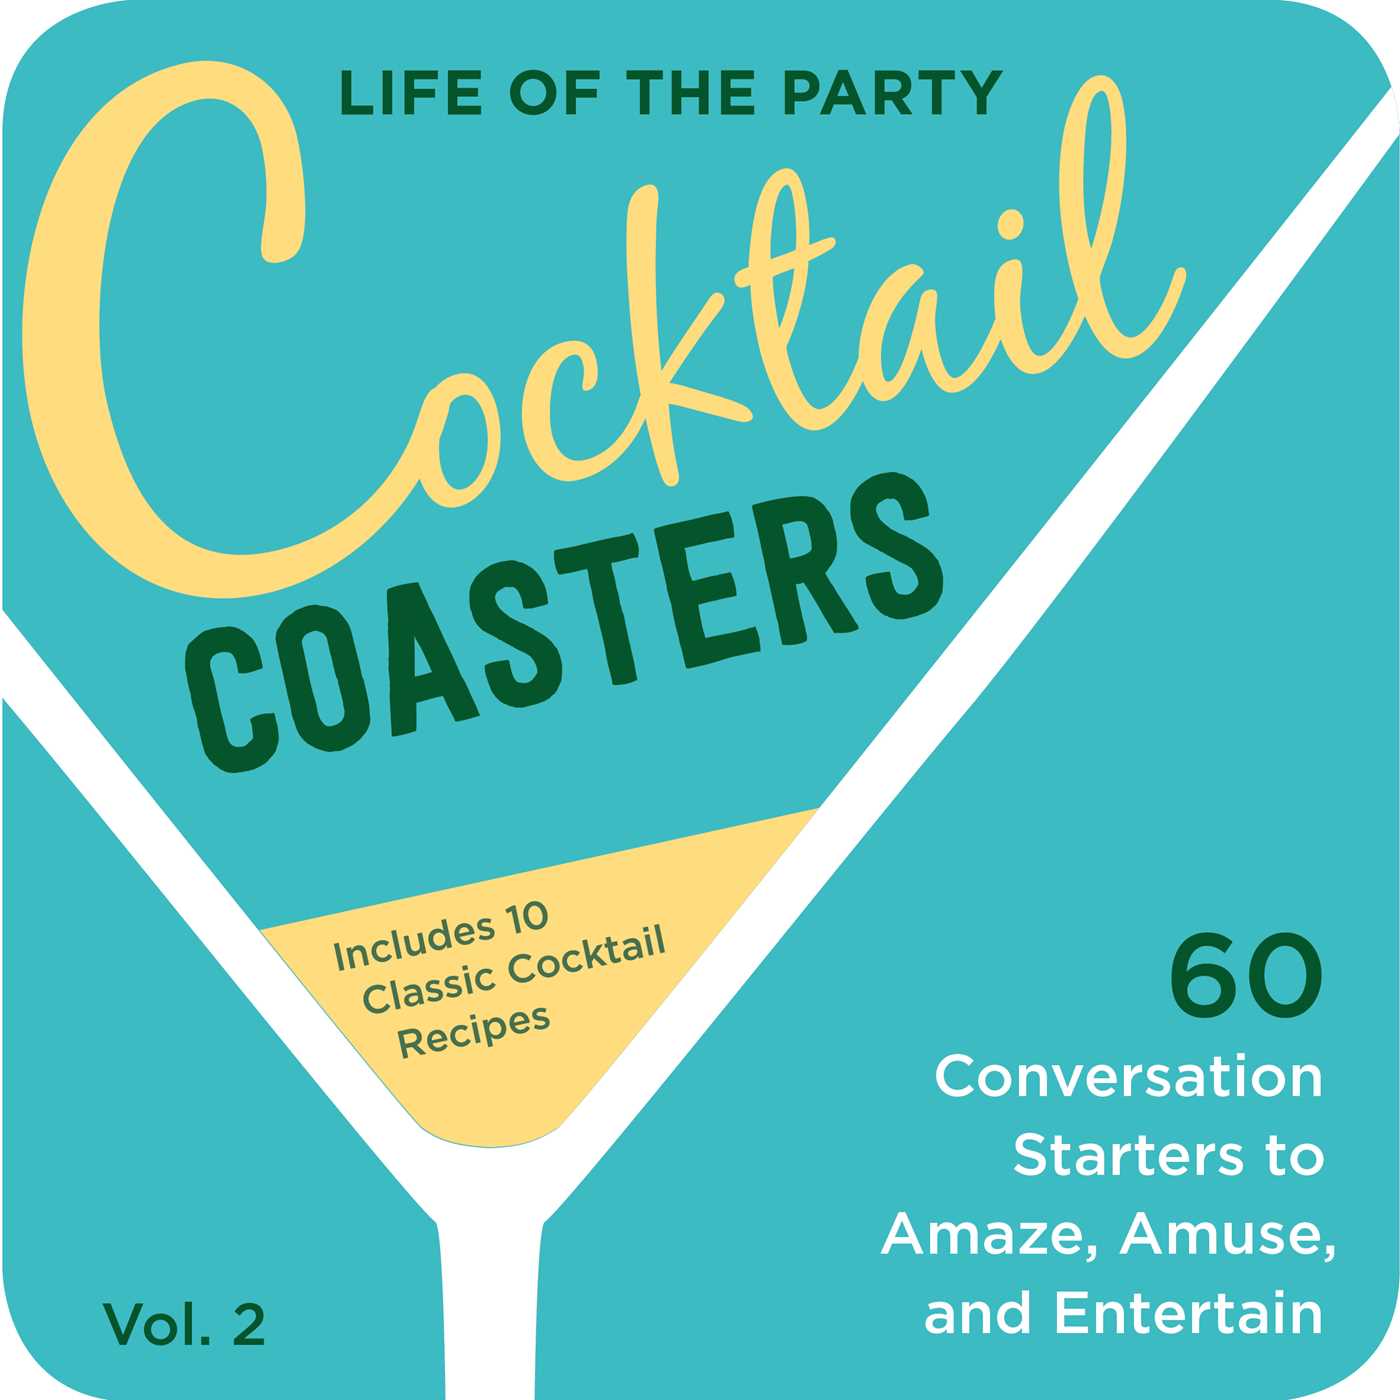 Life of the Party Cocktail Coasters (Volume 2): 60 Conversation Starters to Amaze, Amuse, and Entertain